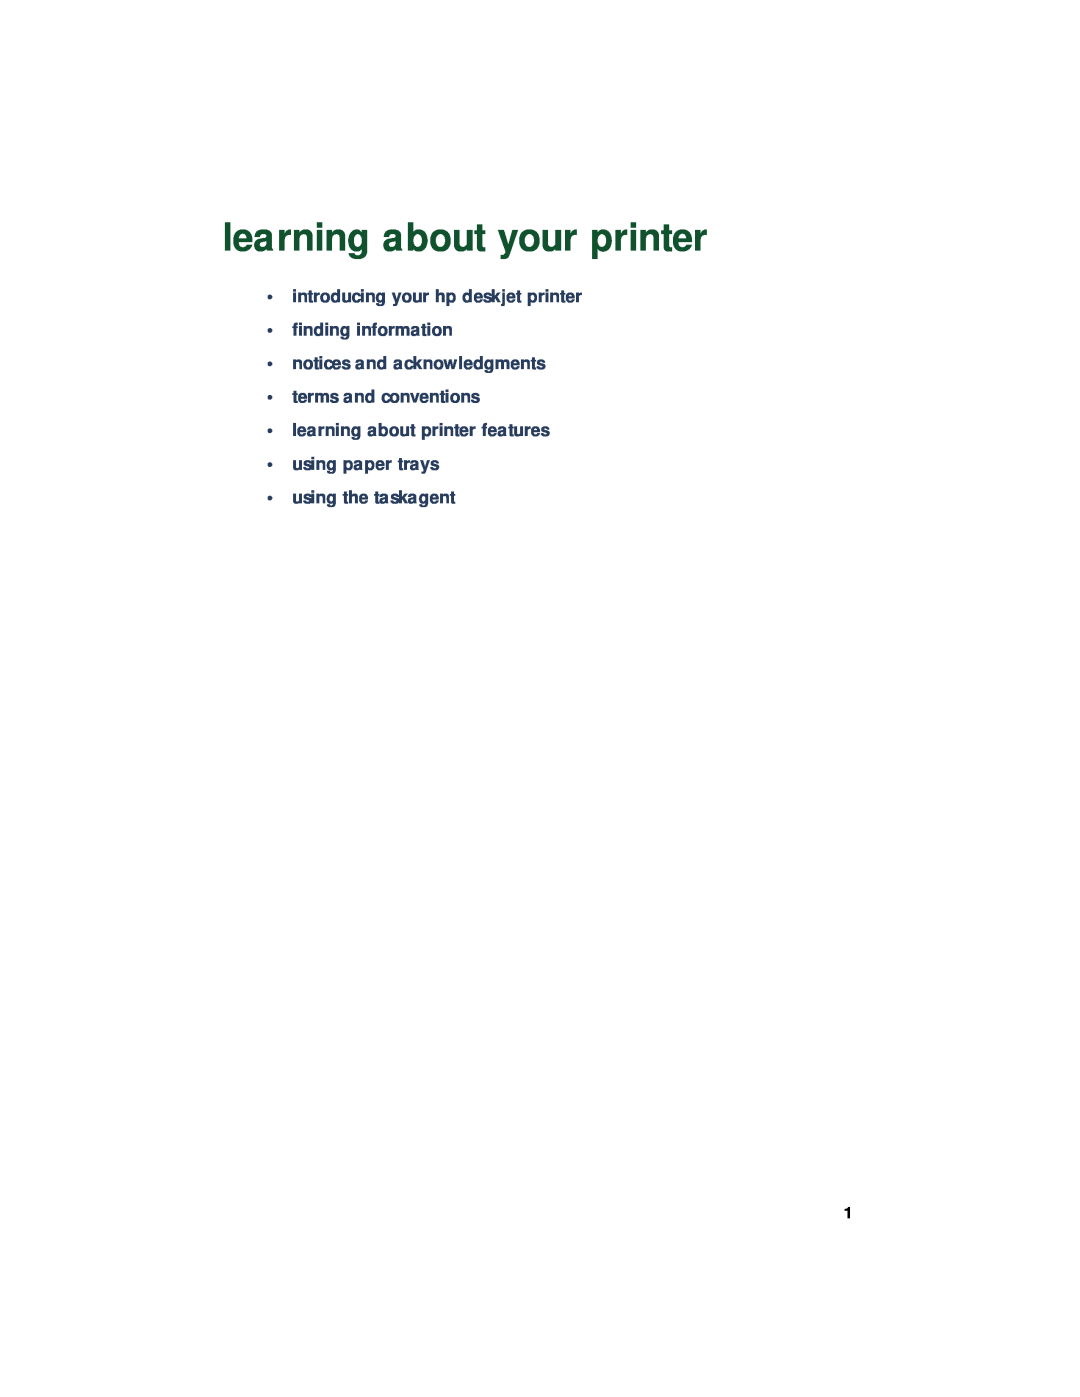 HP 920c, 948c, 940c manual learning about your printer, introducing your hp deskjet printer finding information 